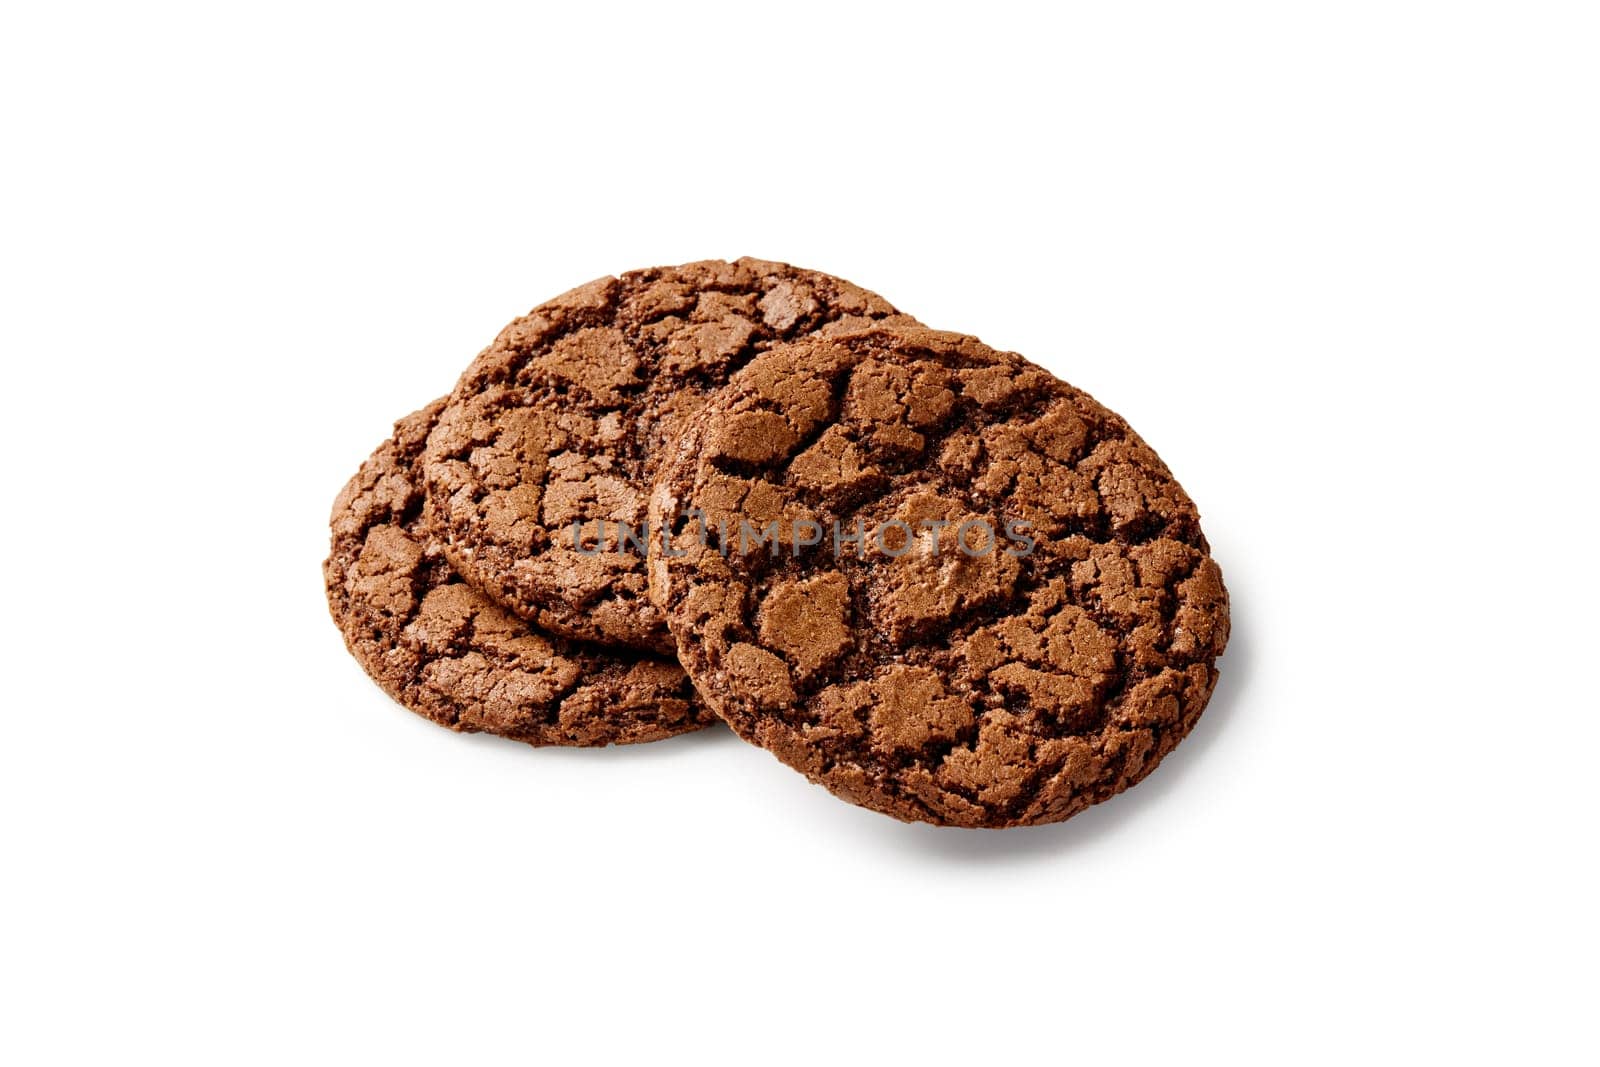 Classic chocolate sugar cookies, crunchy rich chocolatey flavor dessert with cracked surface, isolated on white background